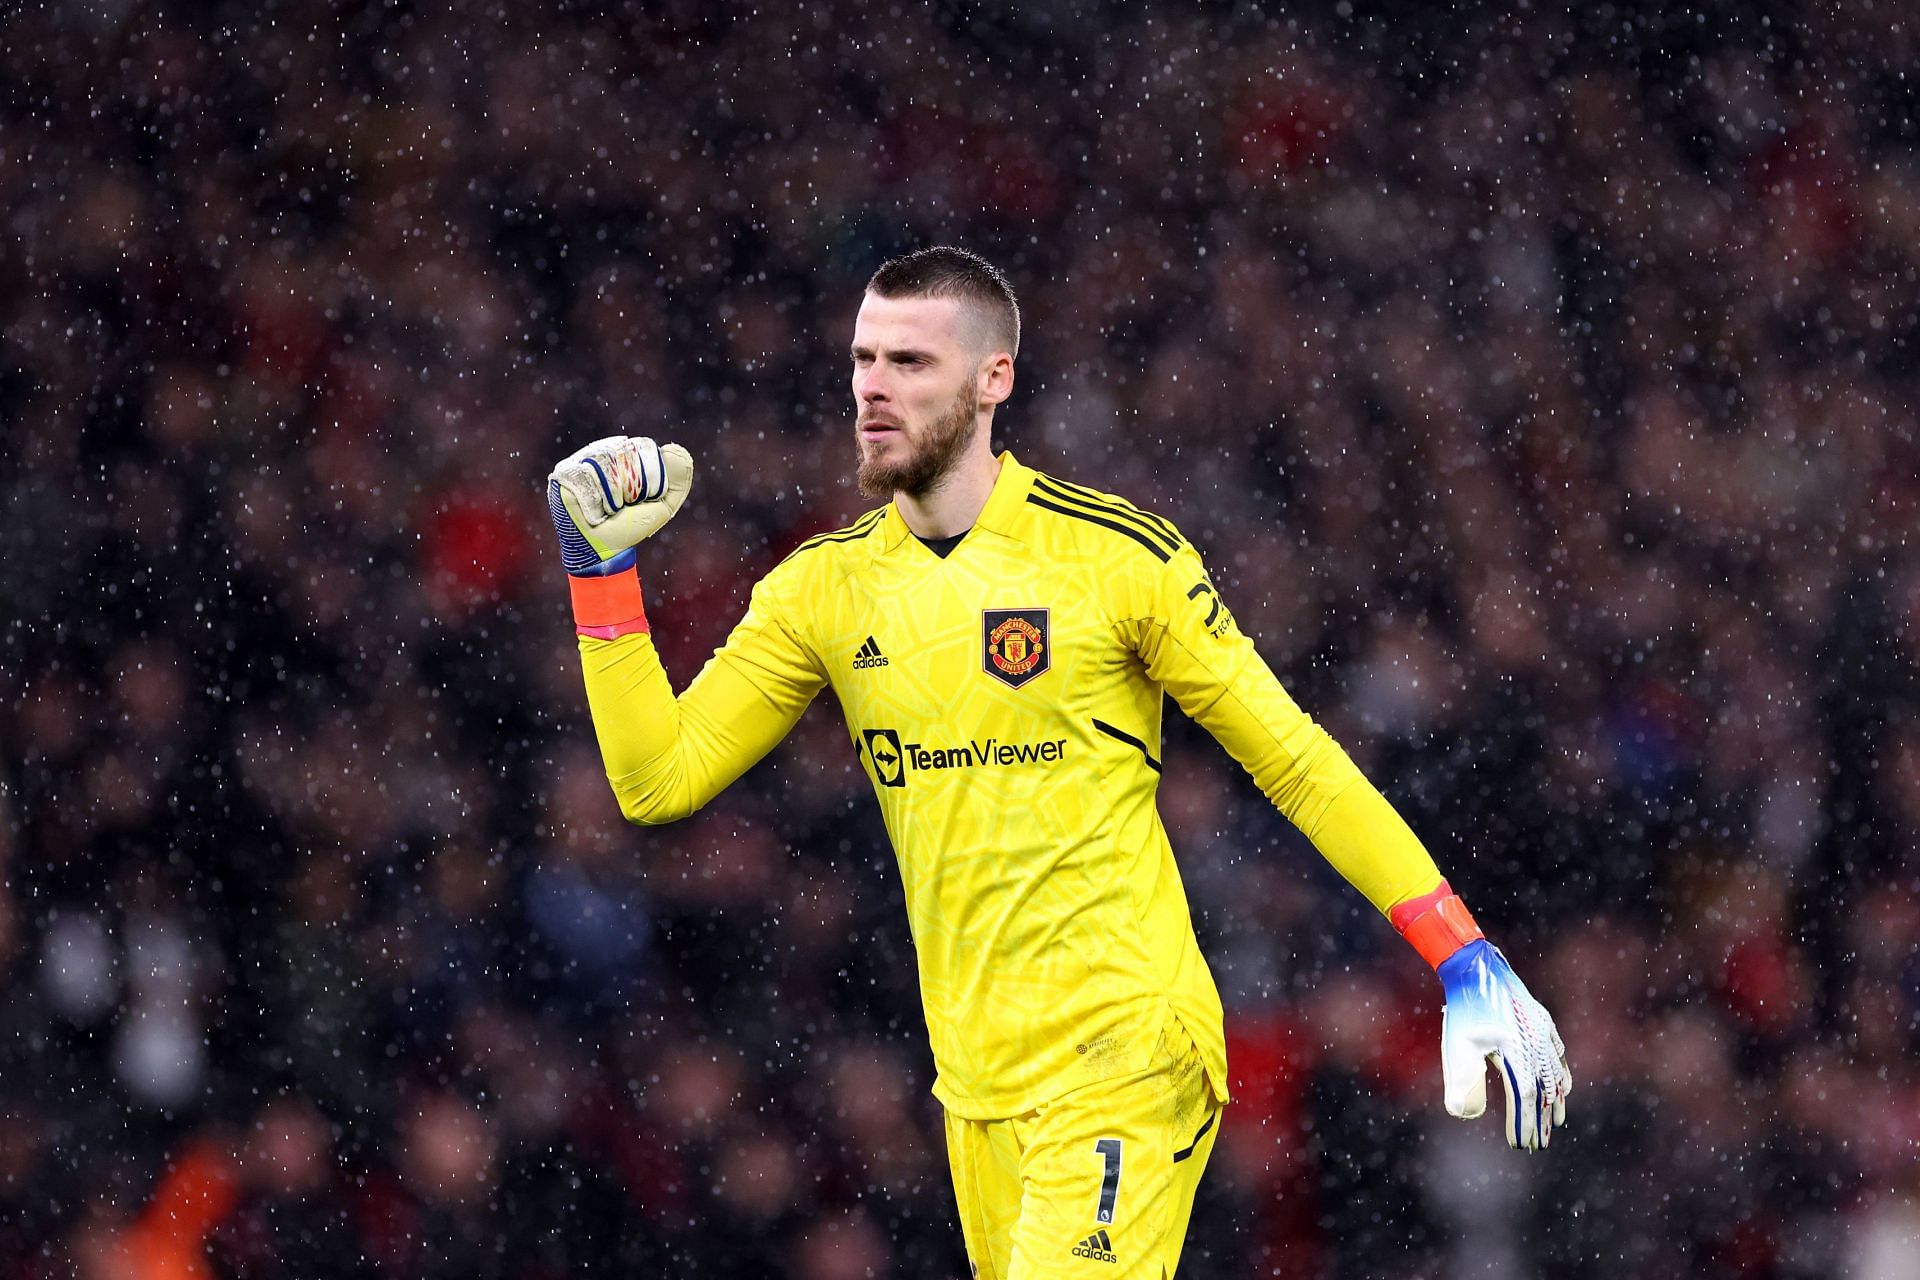 De Gea earned his clean sheet with an assured display in goal for United